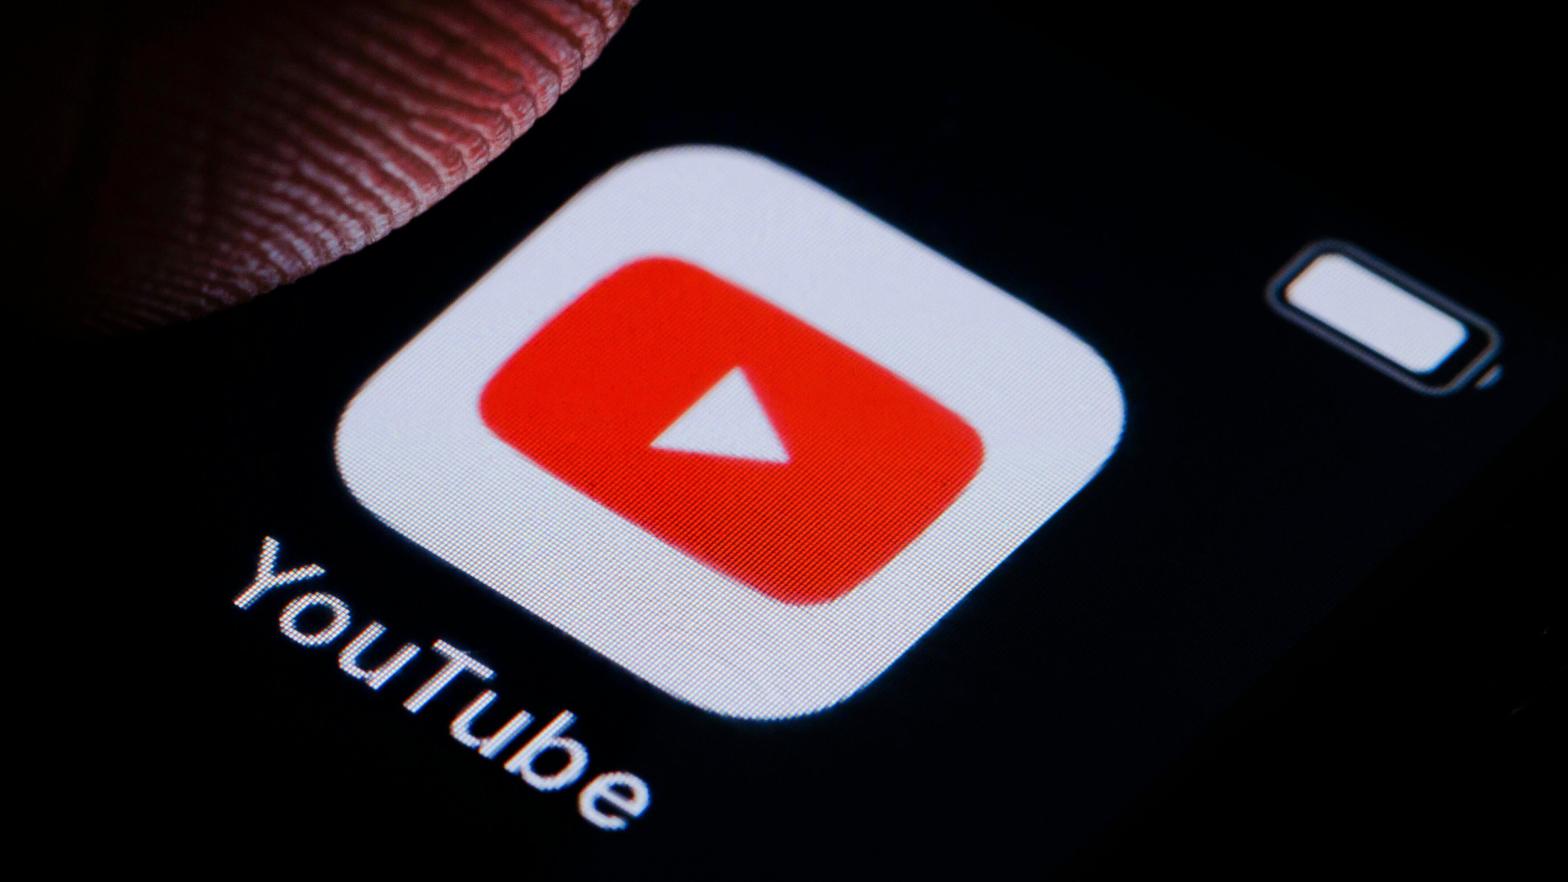 YouTube Wants to Give the Internet’s Worst Commenters the Ability to Fact-Check Videos